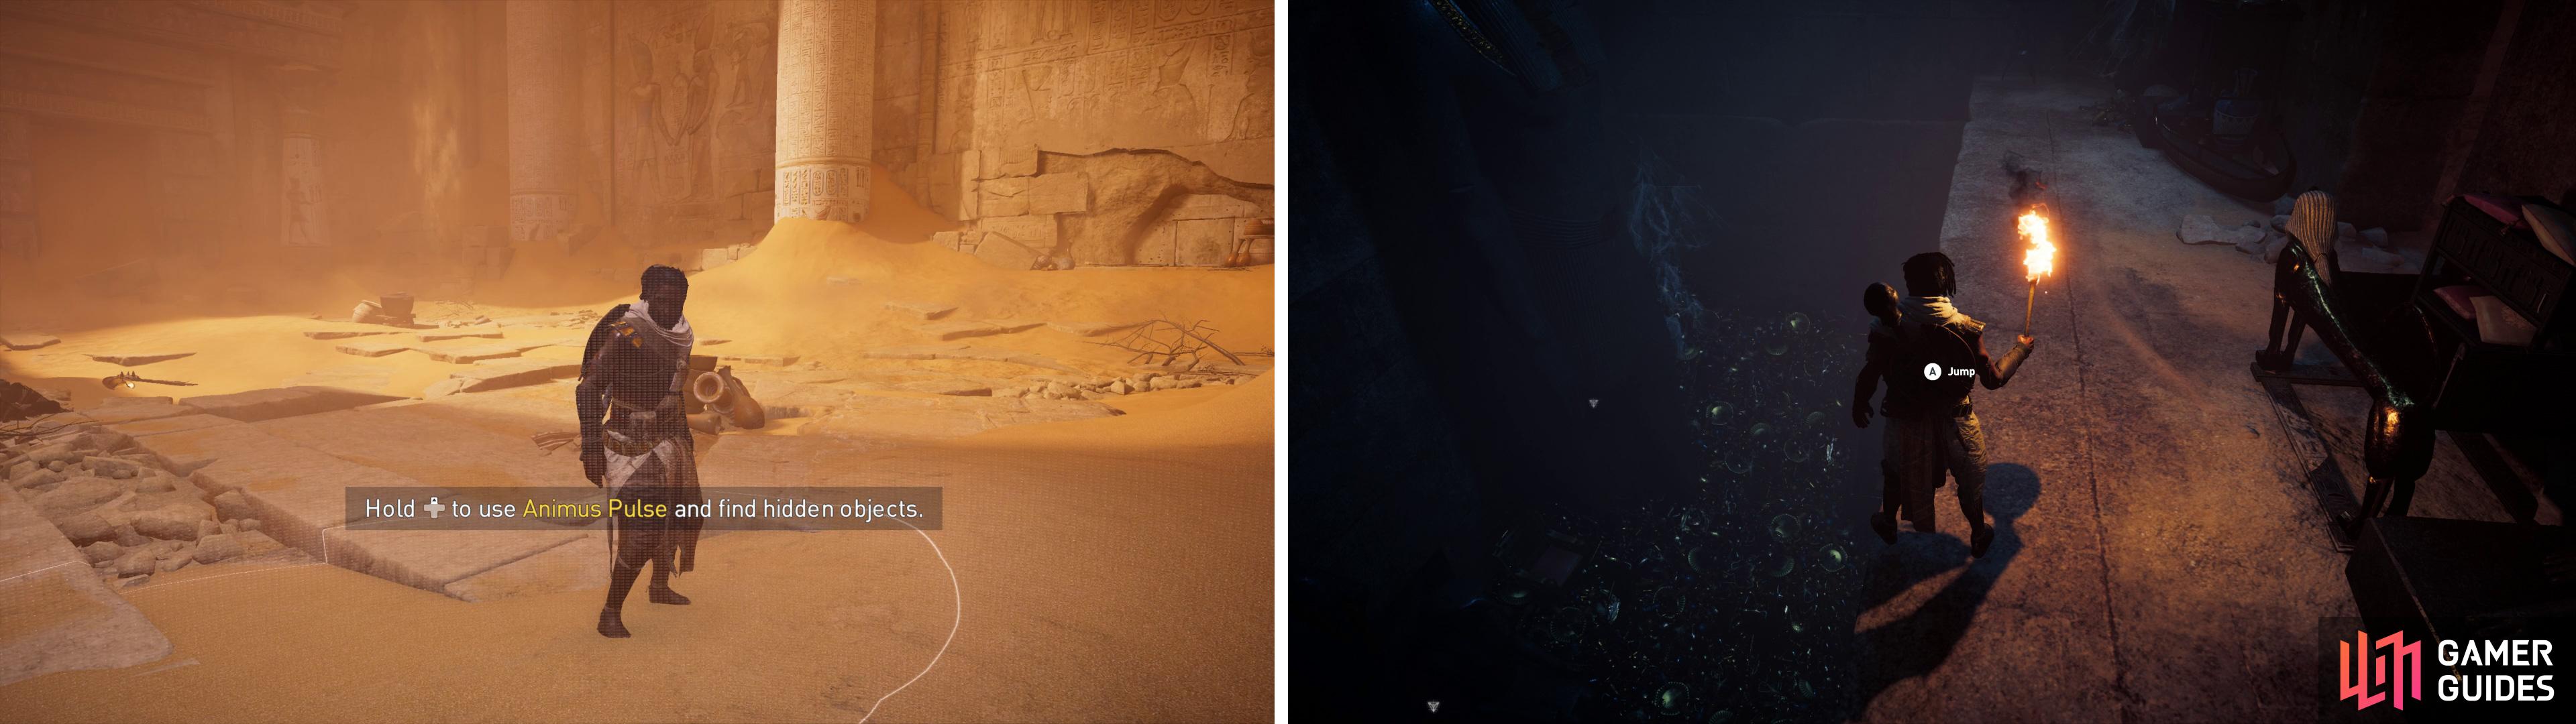 The Animus Pulse (left) is especially useful for hunting treasure (right) and hidden objects.